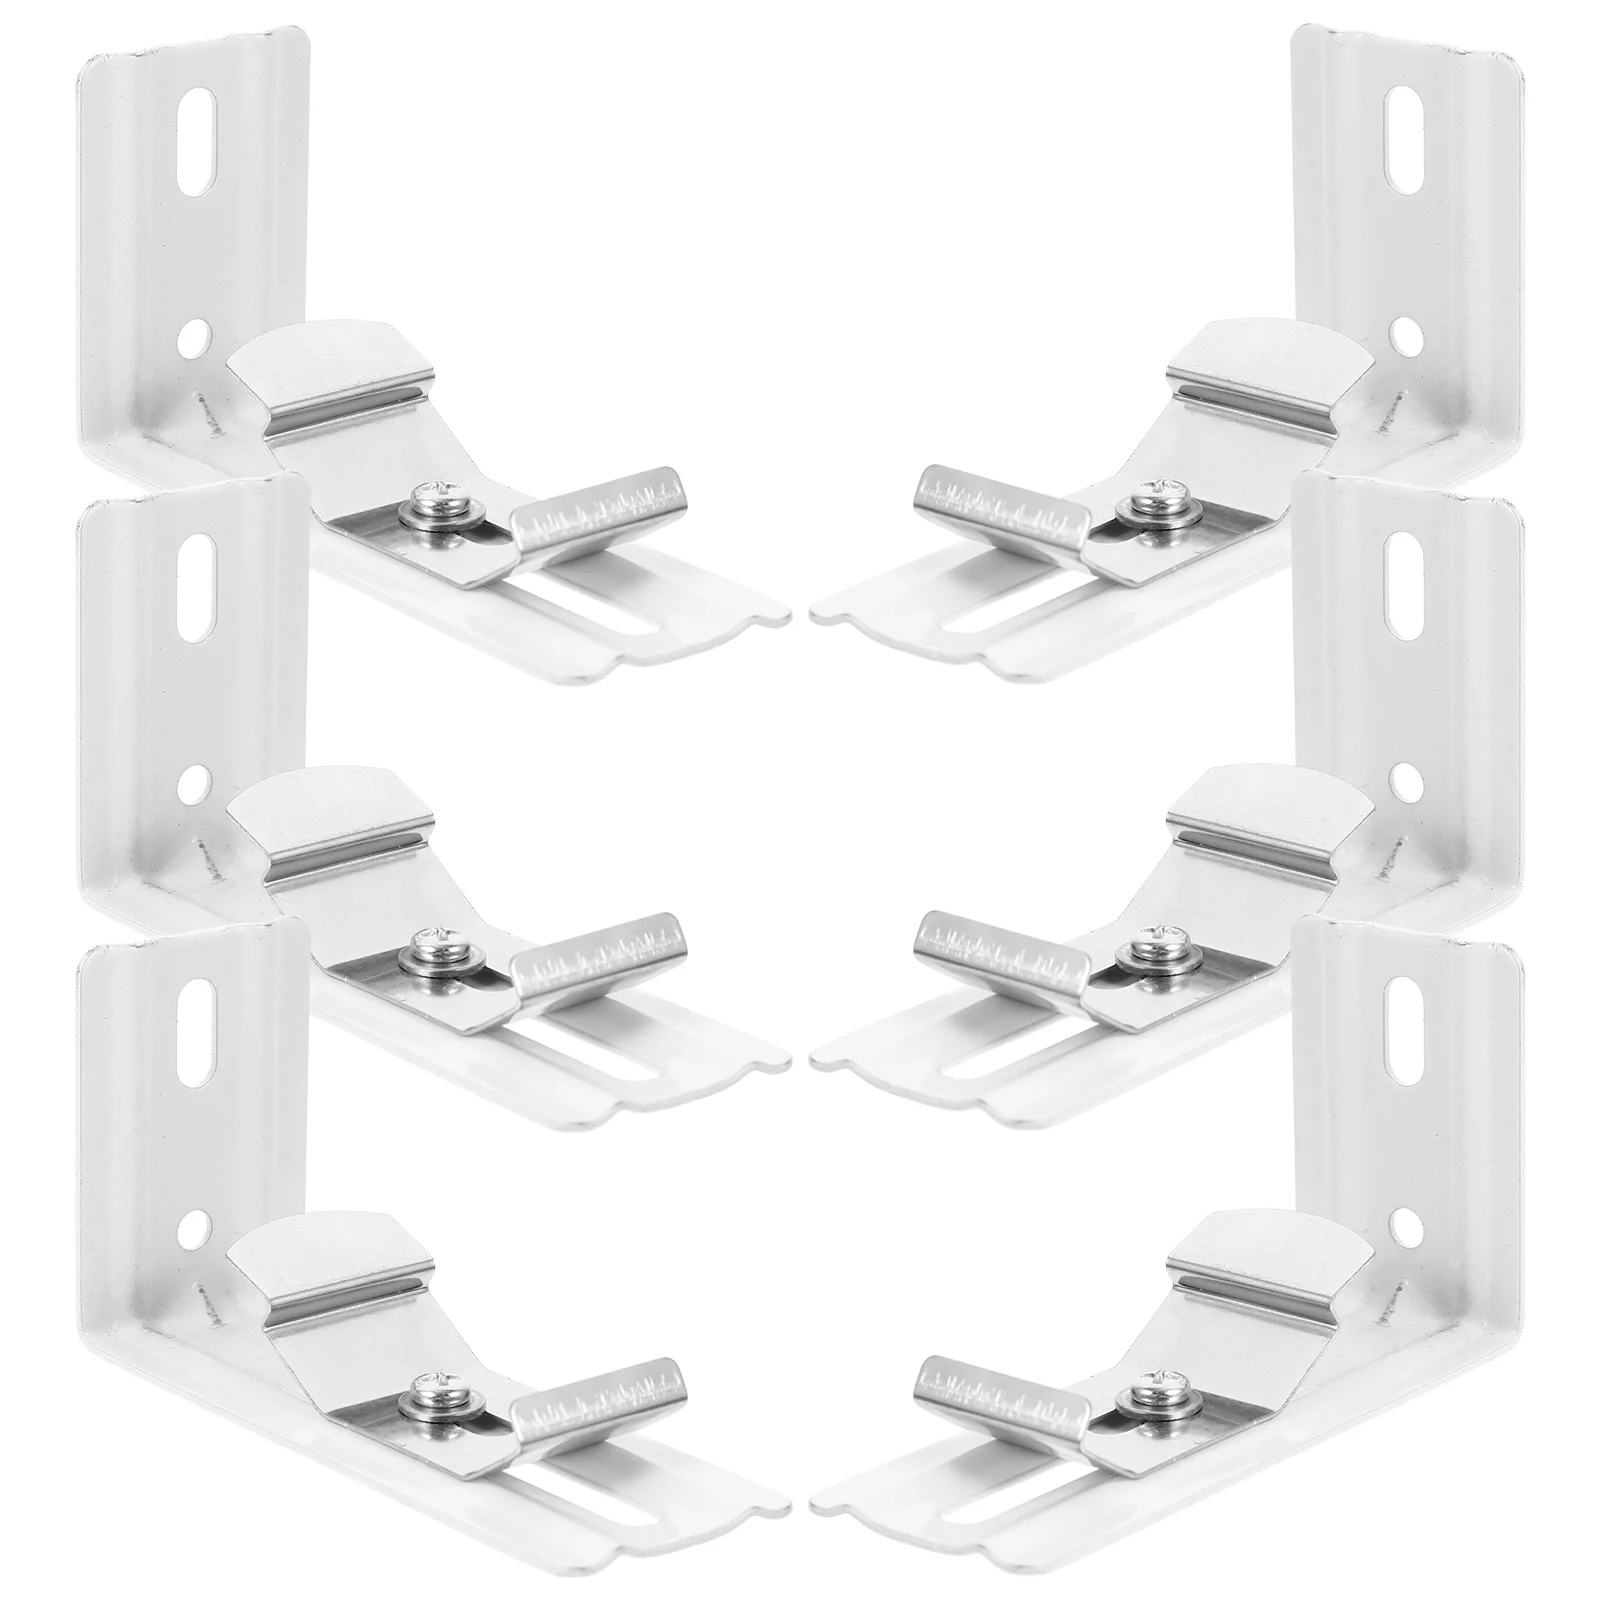 

6 Pcs Vertical Blind Bracket Clip Decor 1/2 Extension Brackets Metal Curtain Valance Clips Track Mounting Blinds